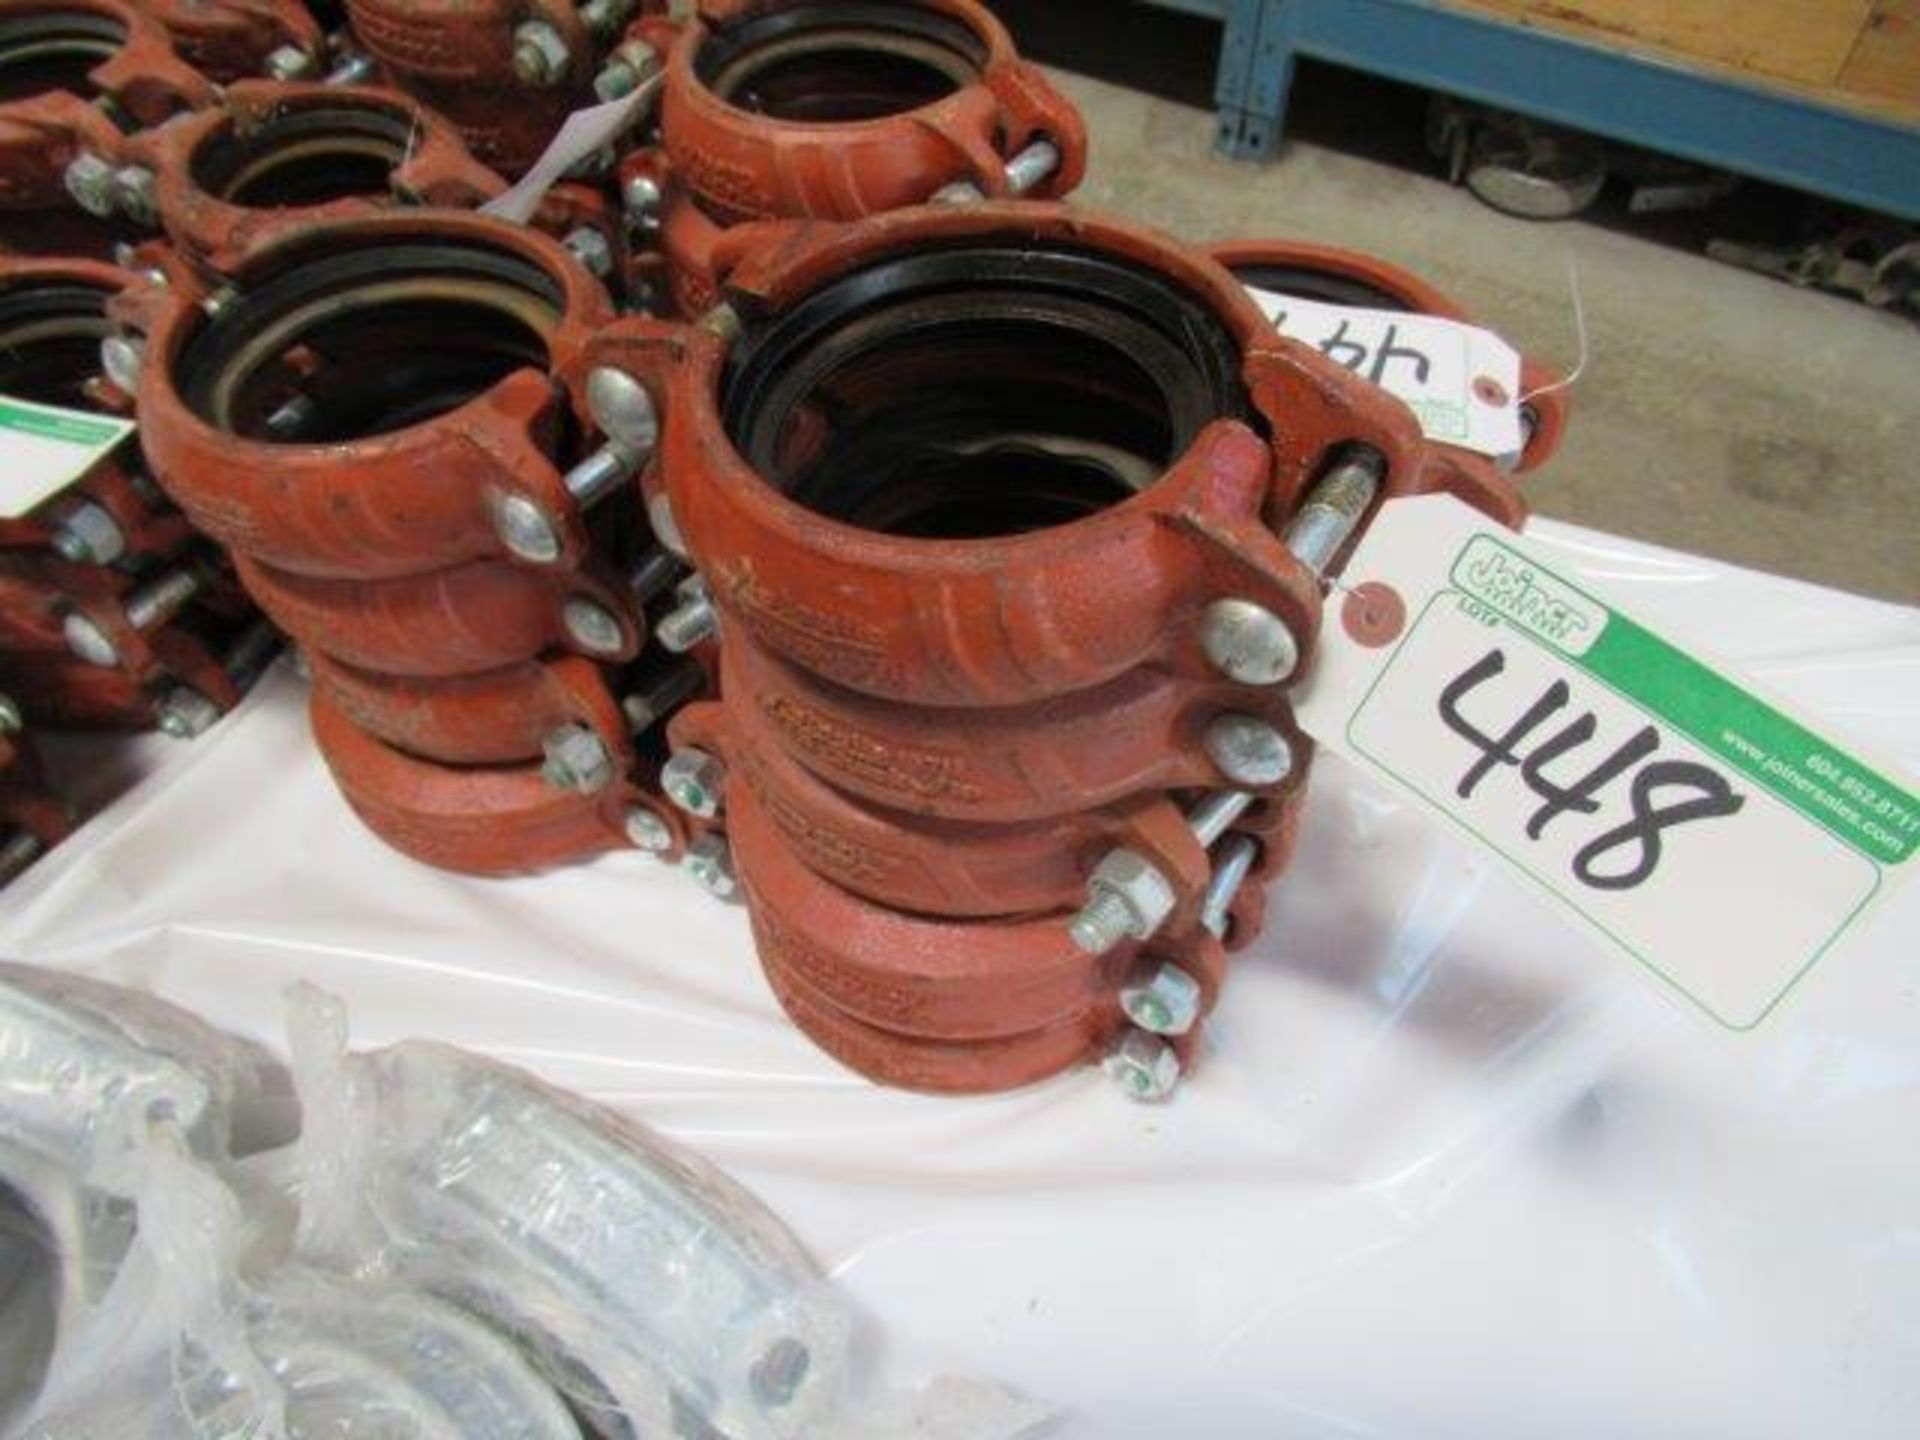 LOT OF VICTAULIC PIPE CLAMPS